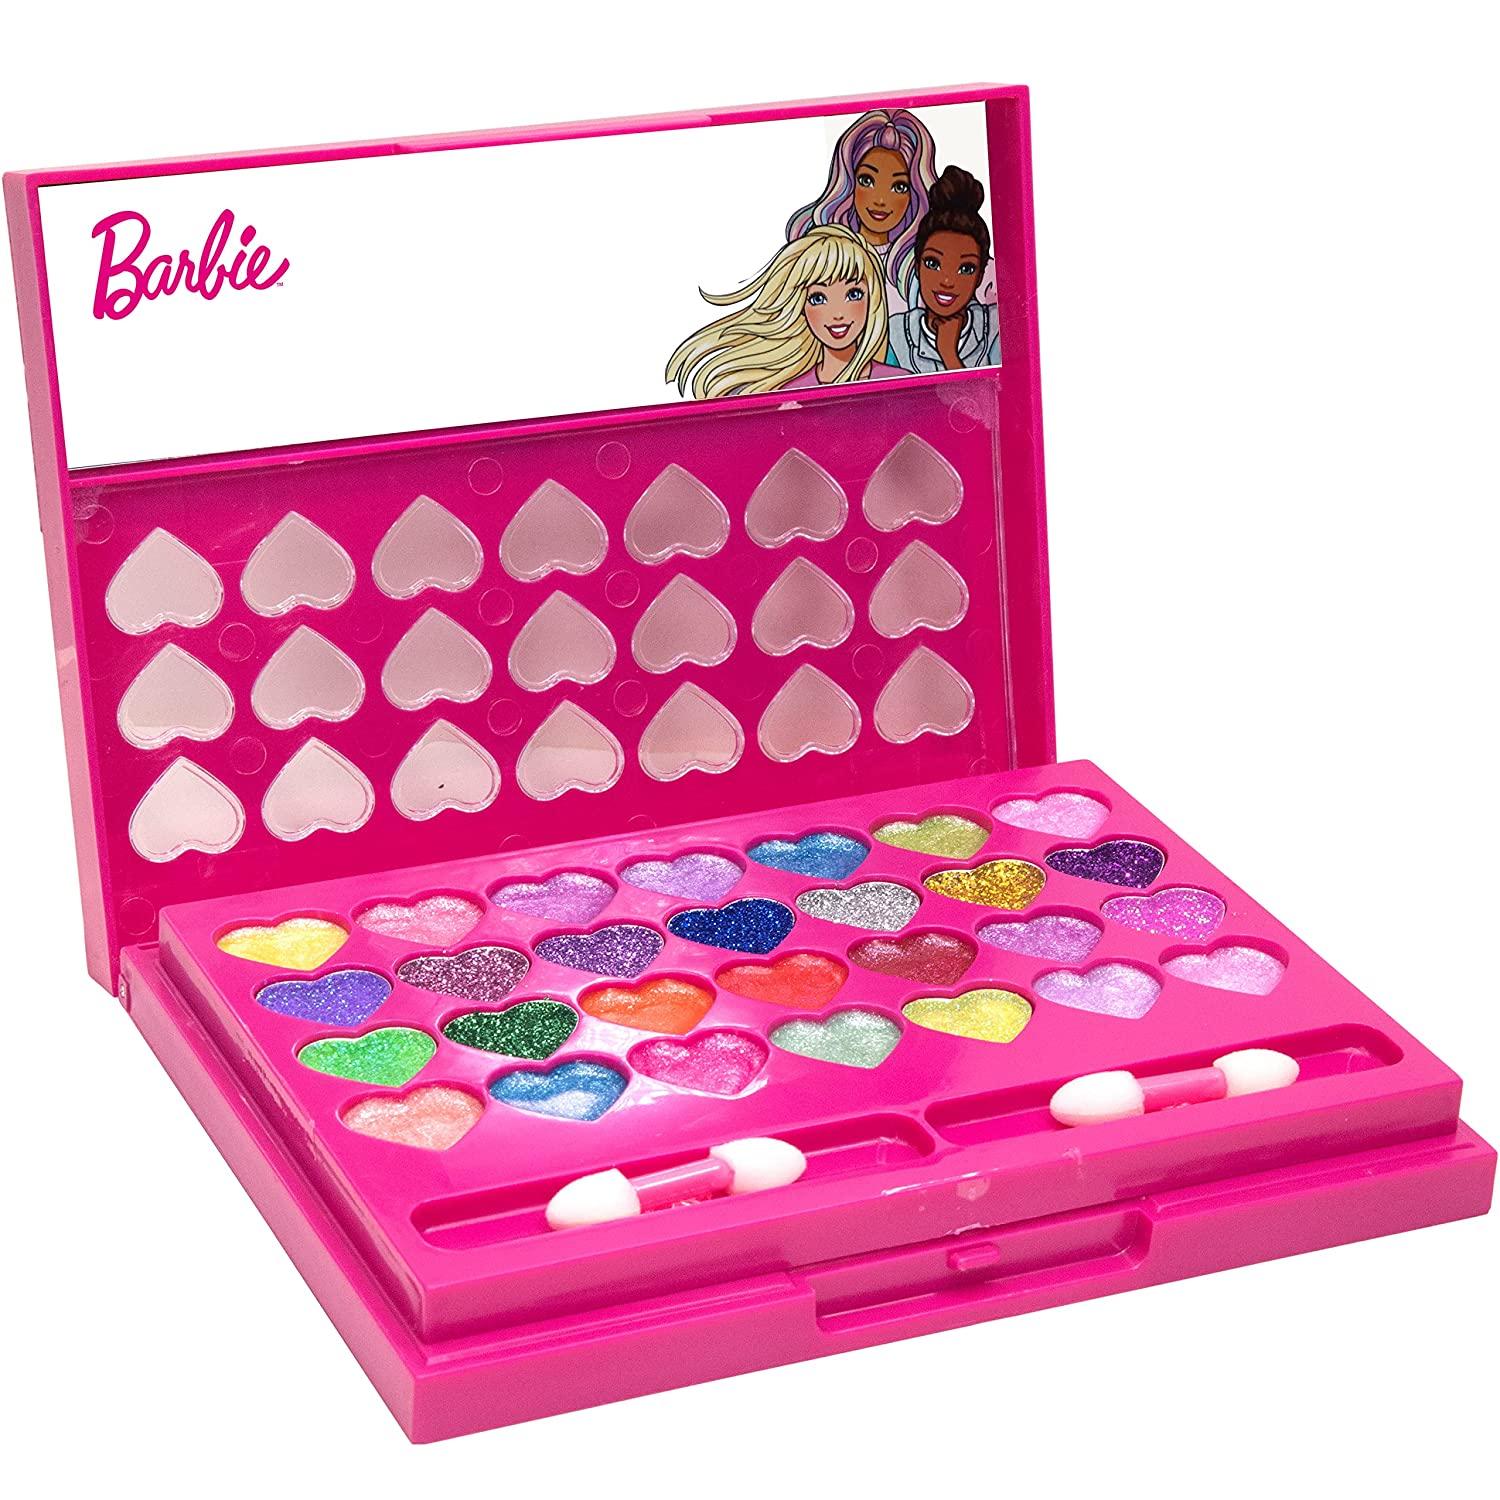 Townley Girl Barbie Beauty Compact Set